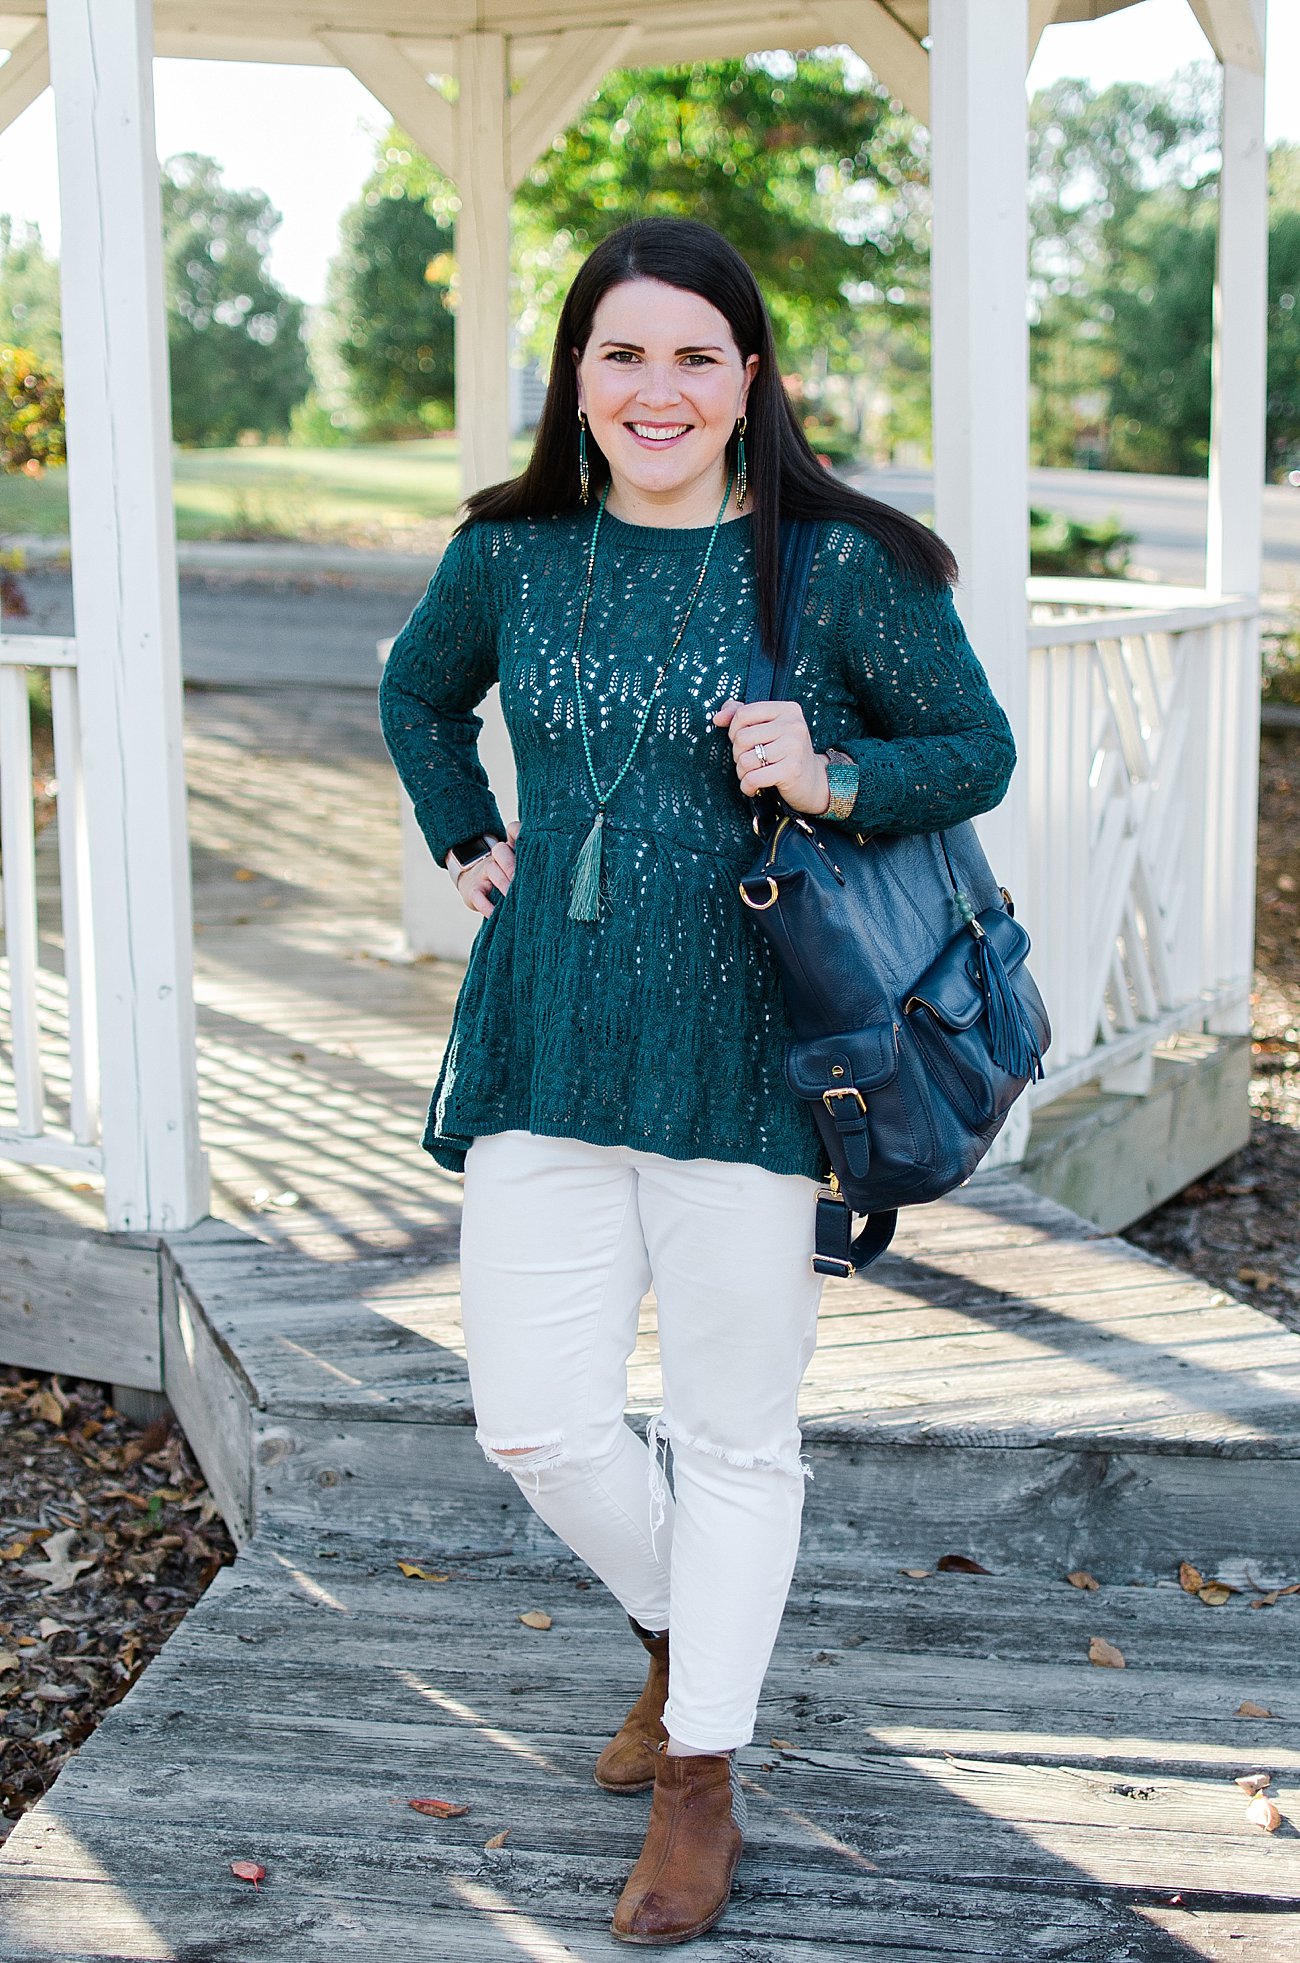 Ethical Fashion Blogger - Grace & Lace Peplum Sweater, Distressed White Jeans, Lily Jade diaper bag, Marquet Fair Trade Jewelry, The Root Collective Espe Booties (11) - Cultivating an Attitude of Gratitude by North Carolina lifestyle blogger Still Being Molly